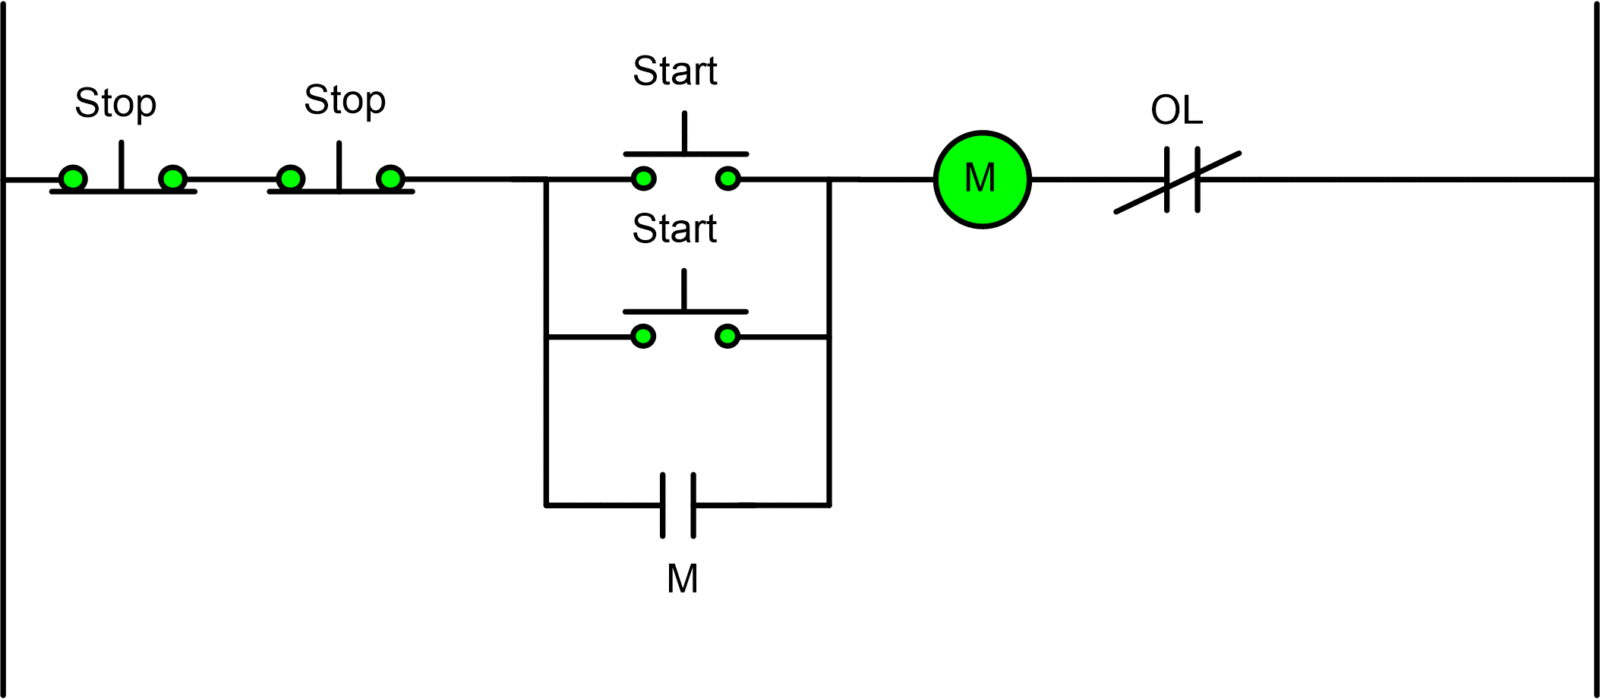 Wiring Diagram For 3 Phase Motor Starter With Stop Start Buttons from electricala2z.com